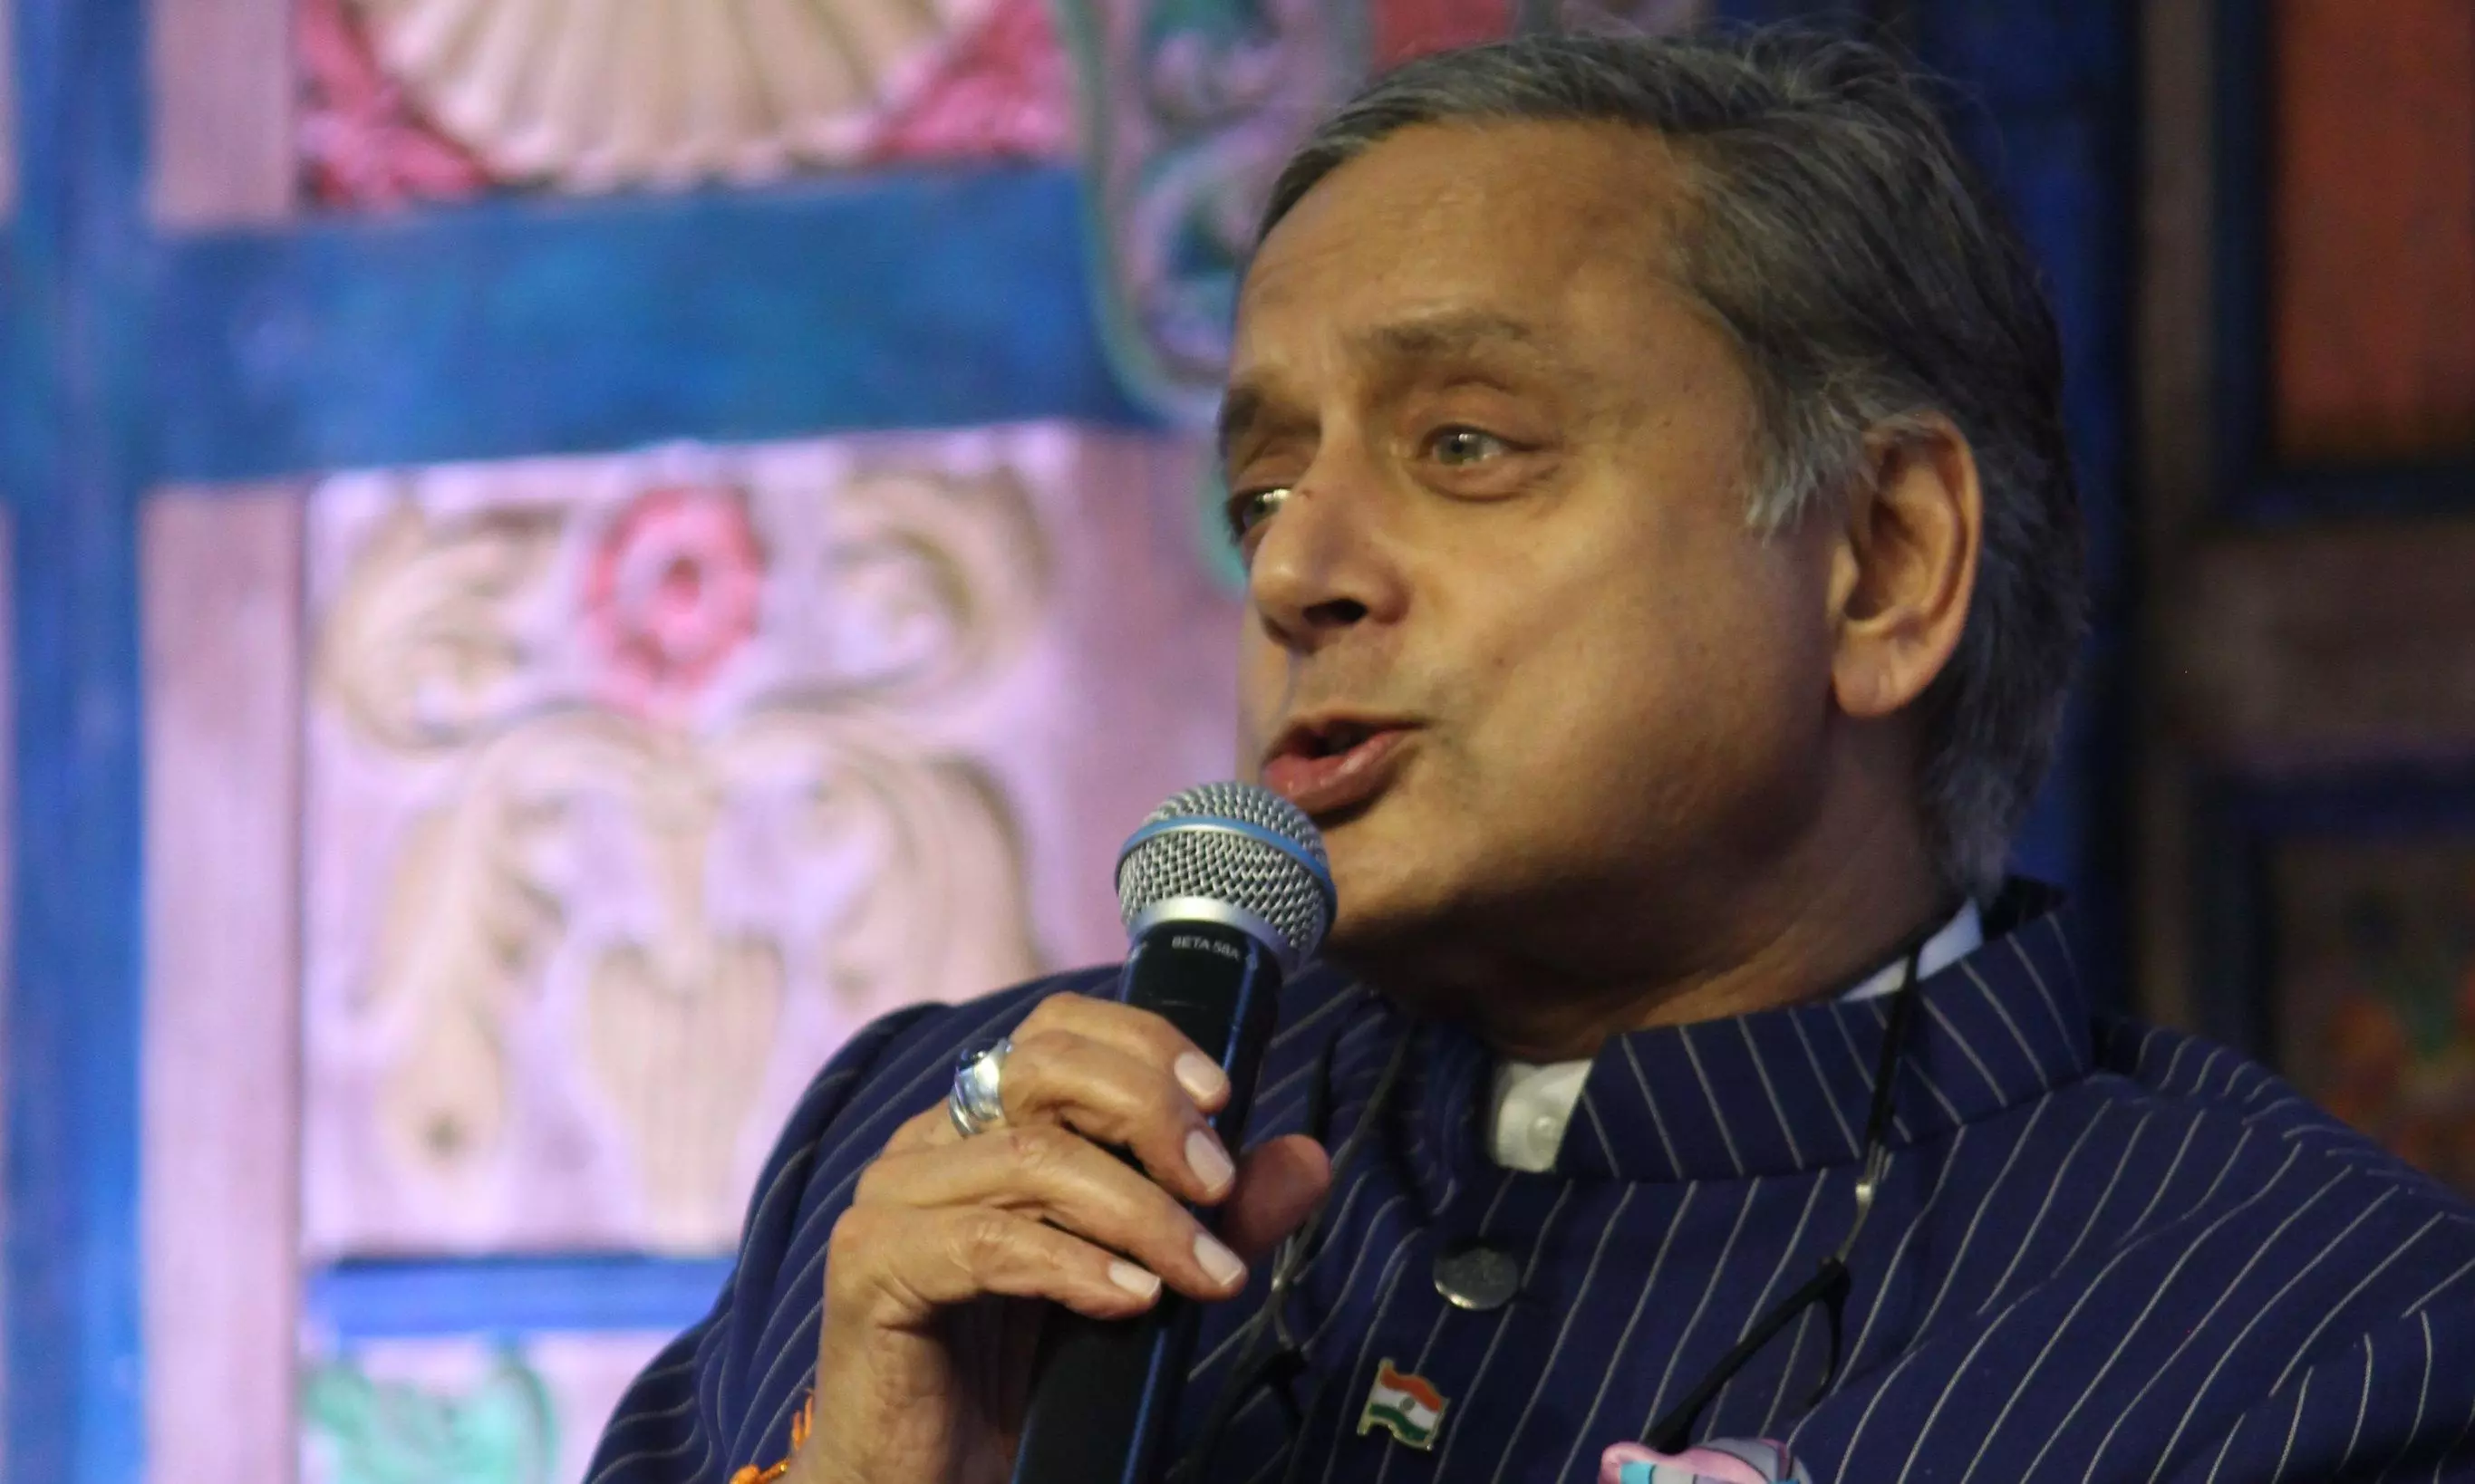 India needs leadership that listens to people, addresses their needs: Tharoor